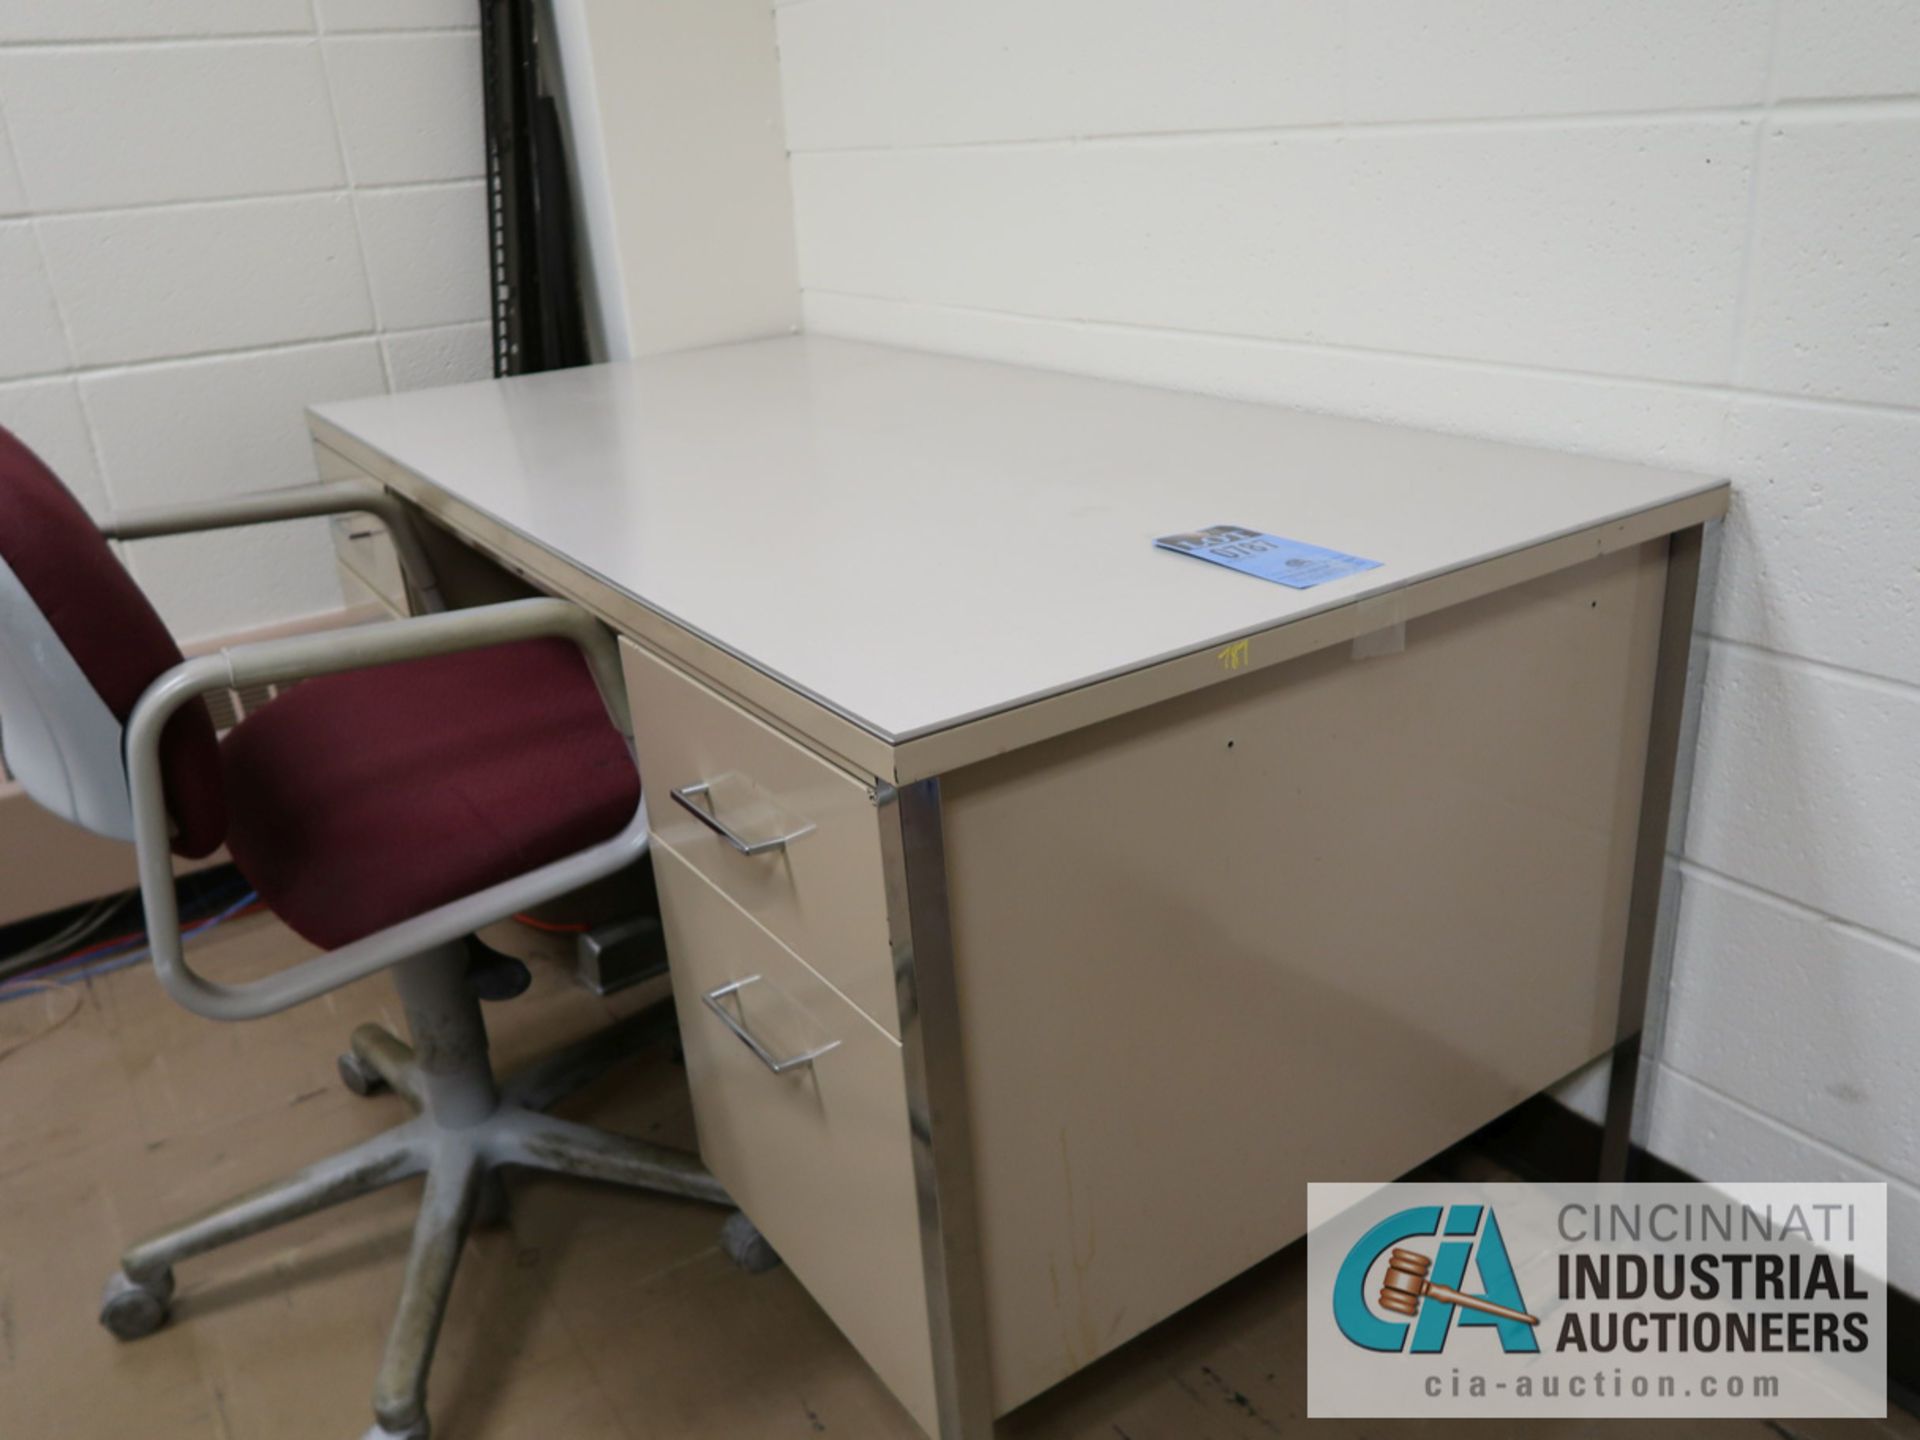 (LOT) FURNITURE IN CUBICLE INCLUDING (2) DESKS, (2) CABINETS, TABLE - Image 3 of 3